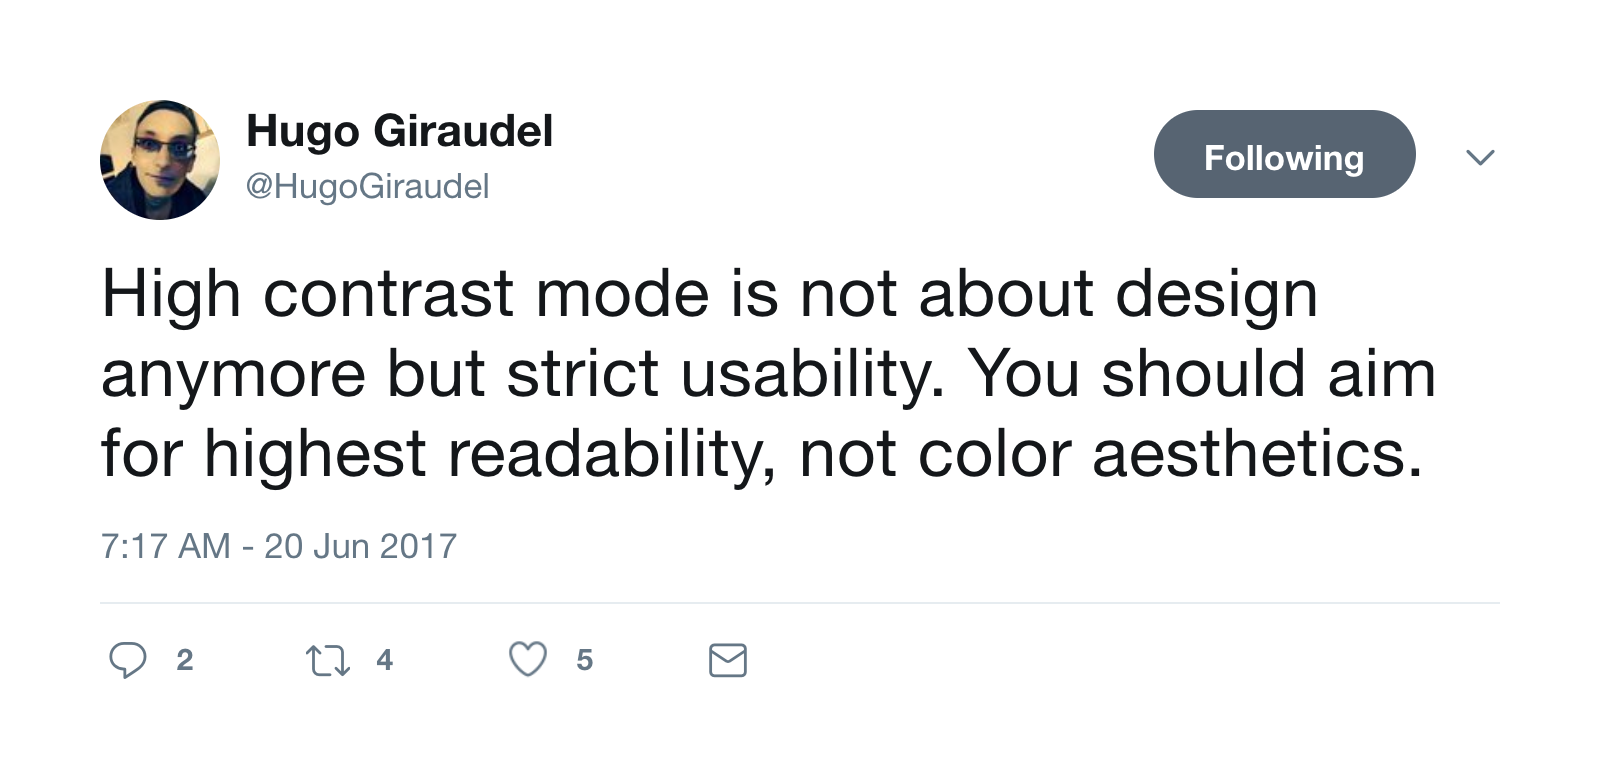 Tweet by Hugo Giraudel: High contrast mode is not about design anymore, but strict usability. You should aim for highest readability, not color aesthetics.